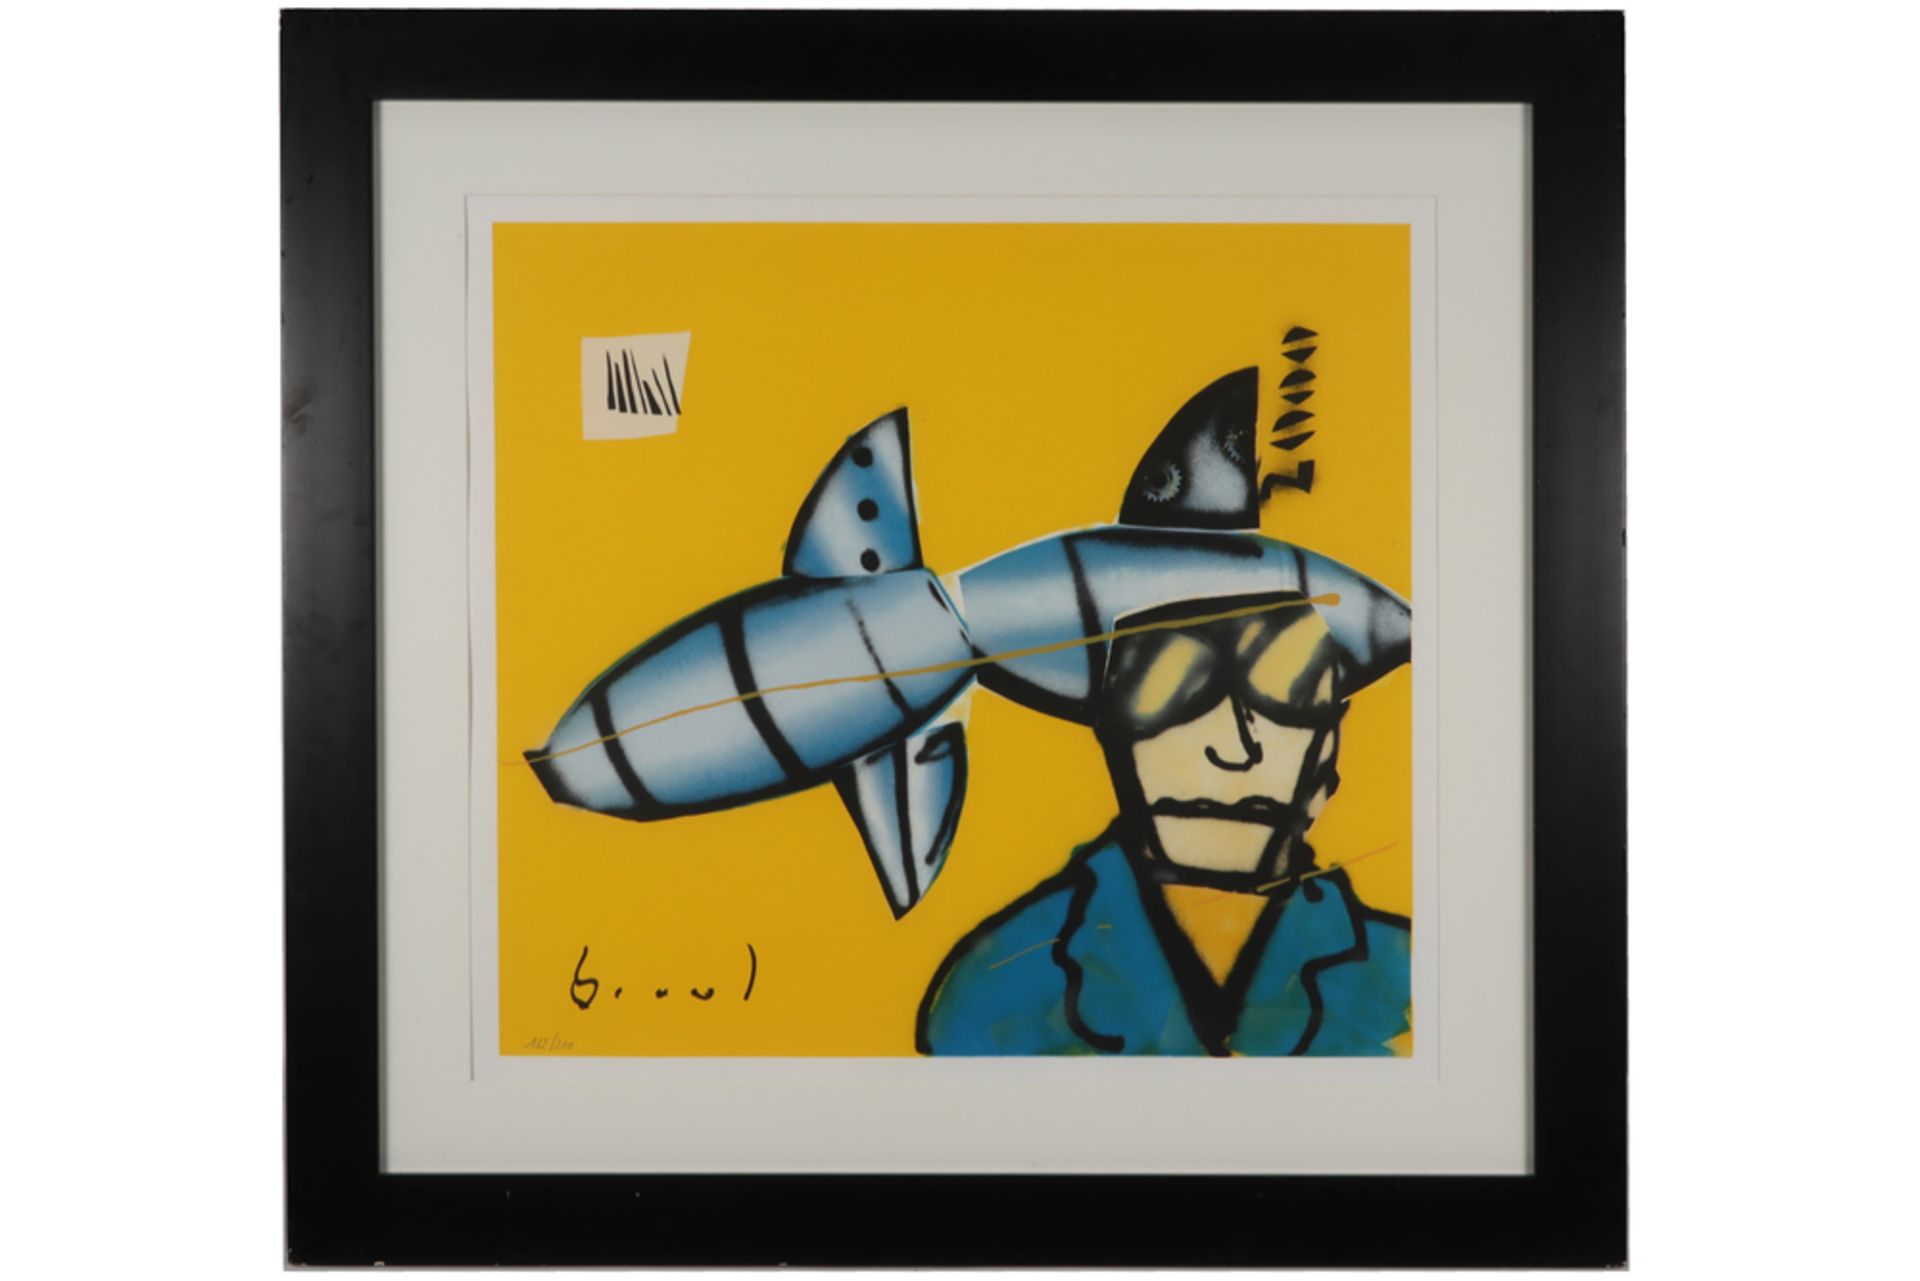 20th Cent. Dutch lithograph printed in colors - signed Herman Brood || BROOD HERMAN (1946 - 2001) - Image 3 of 3